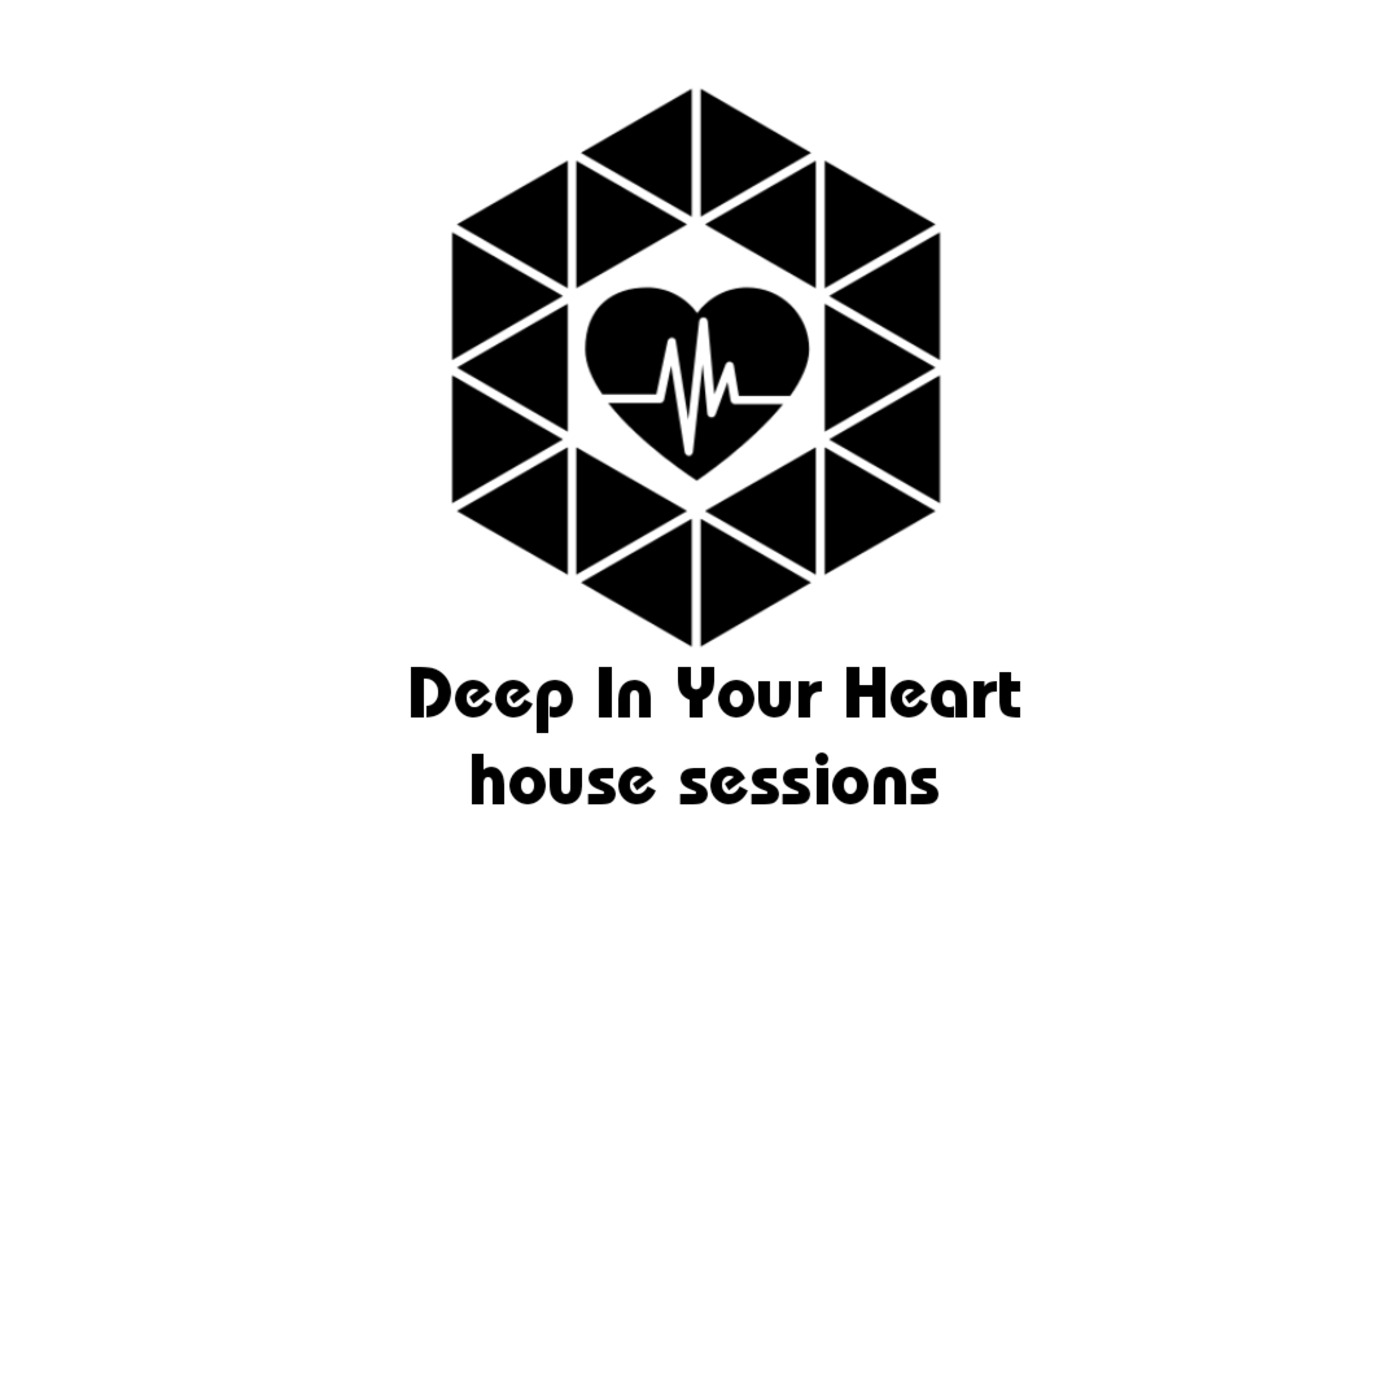 DEEP IN YOUR HEART house sessions Pres The Kernel Guest Mix by Numero Uno